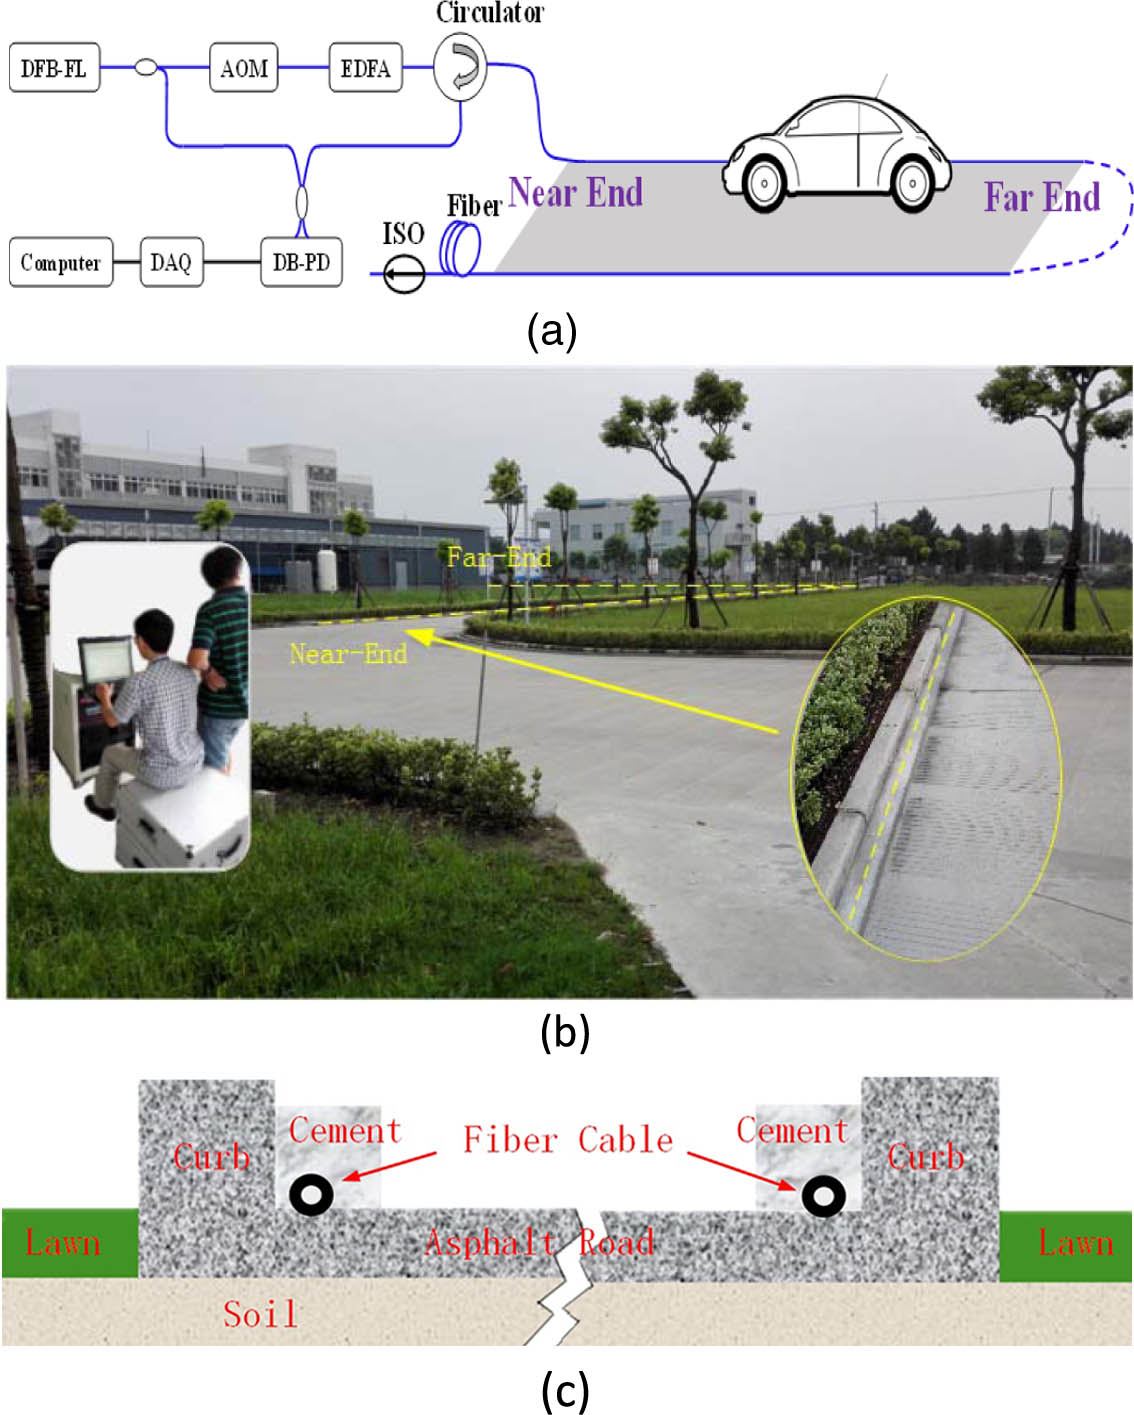 (a) Experimental setup of Φ-OTDR; (b) photo of the experimental field; (c) installation structure of the sensing cable and the road (road cross section).